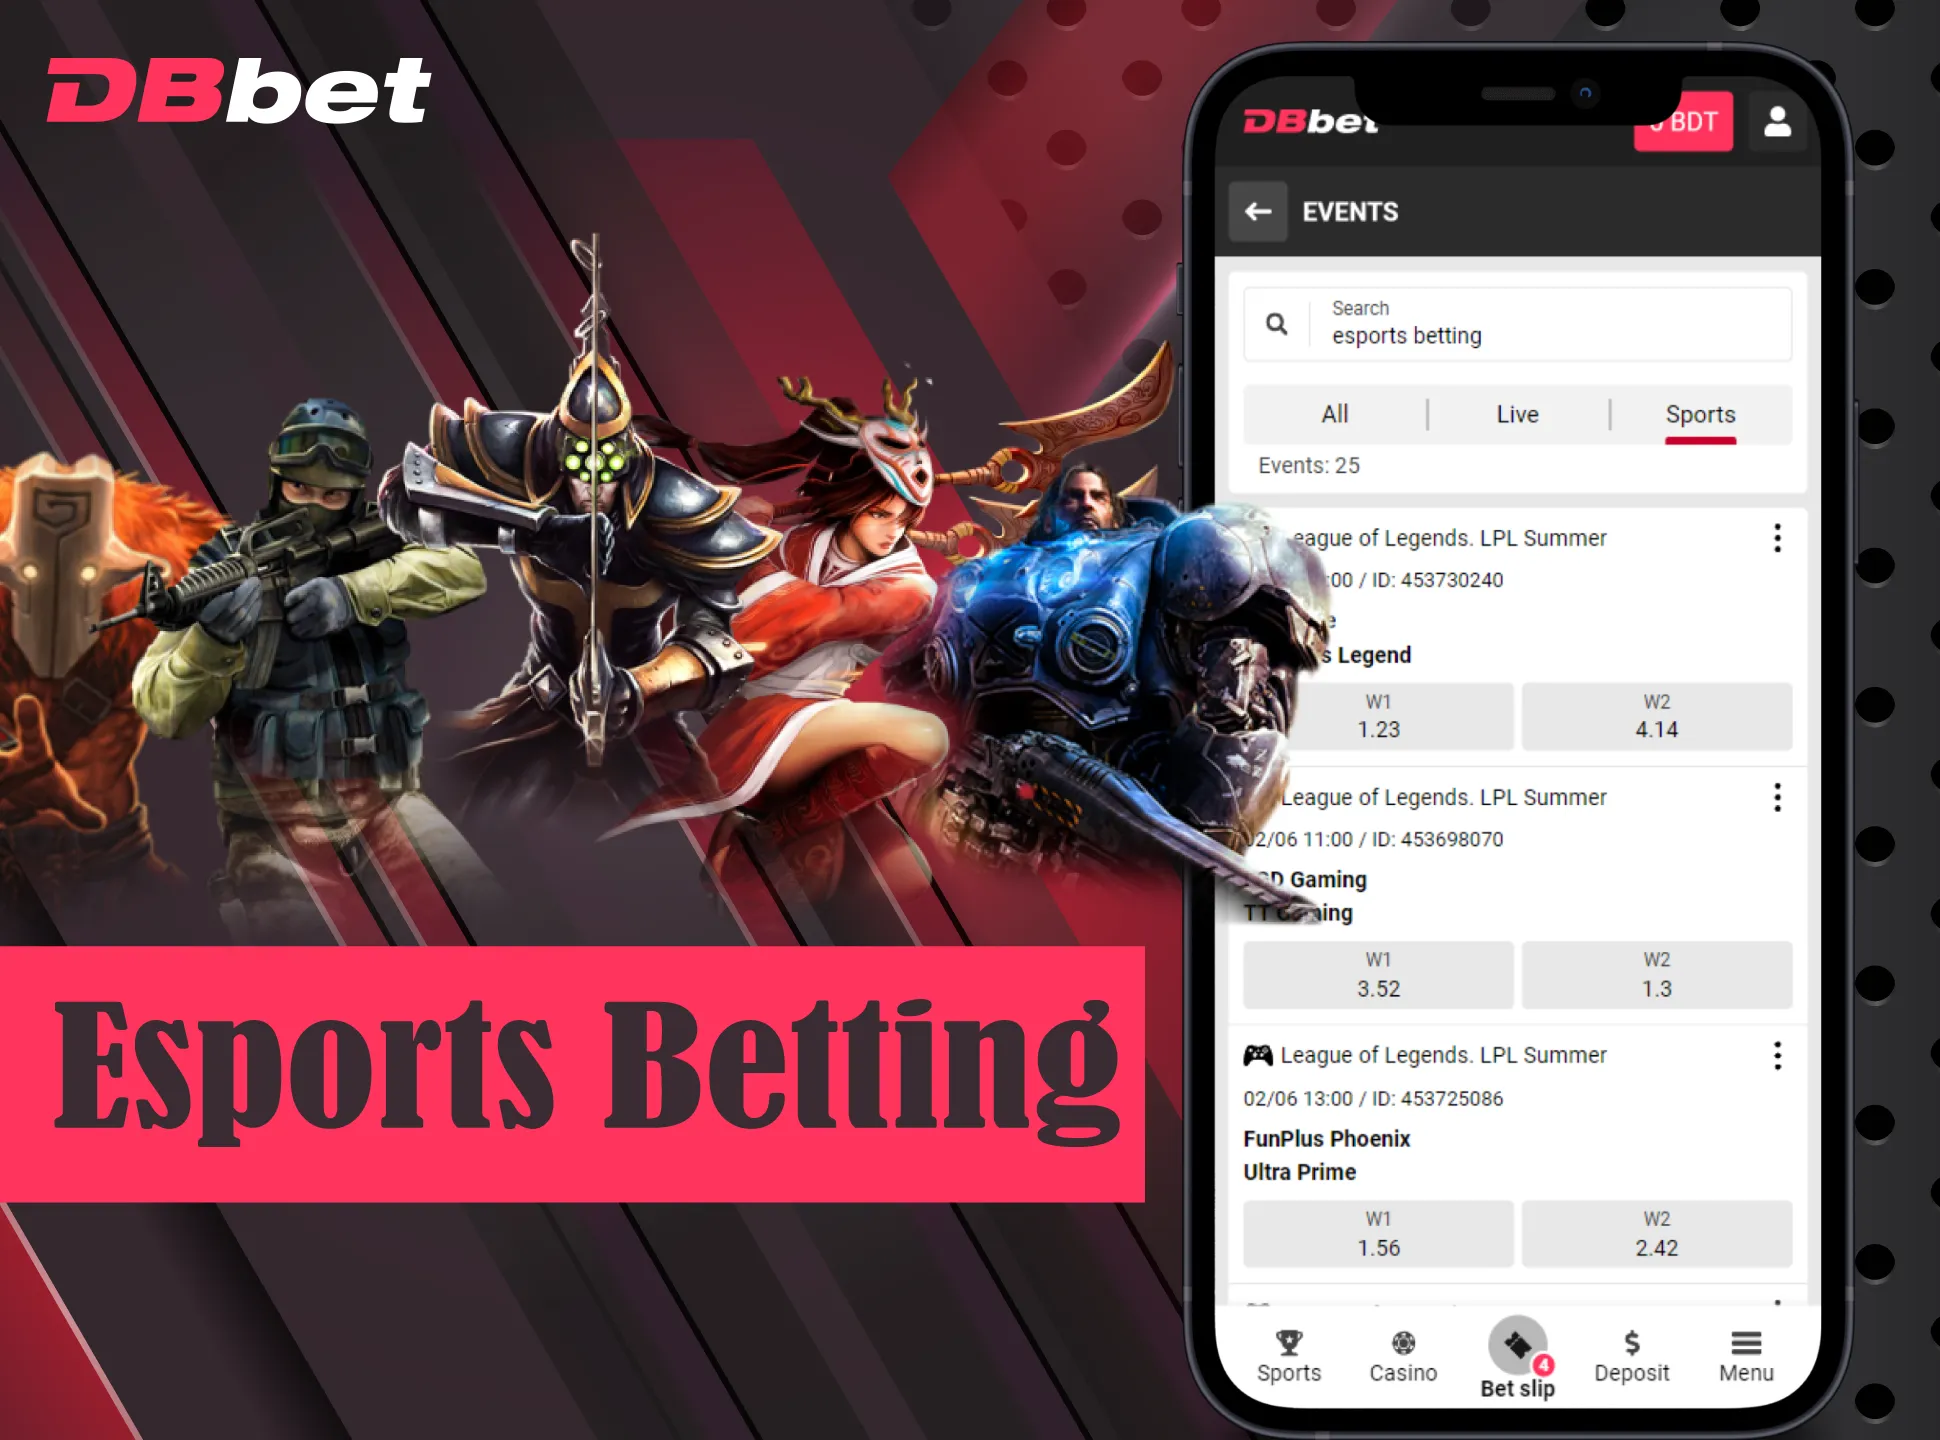 Bet on different esports using DBbet app.